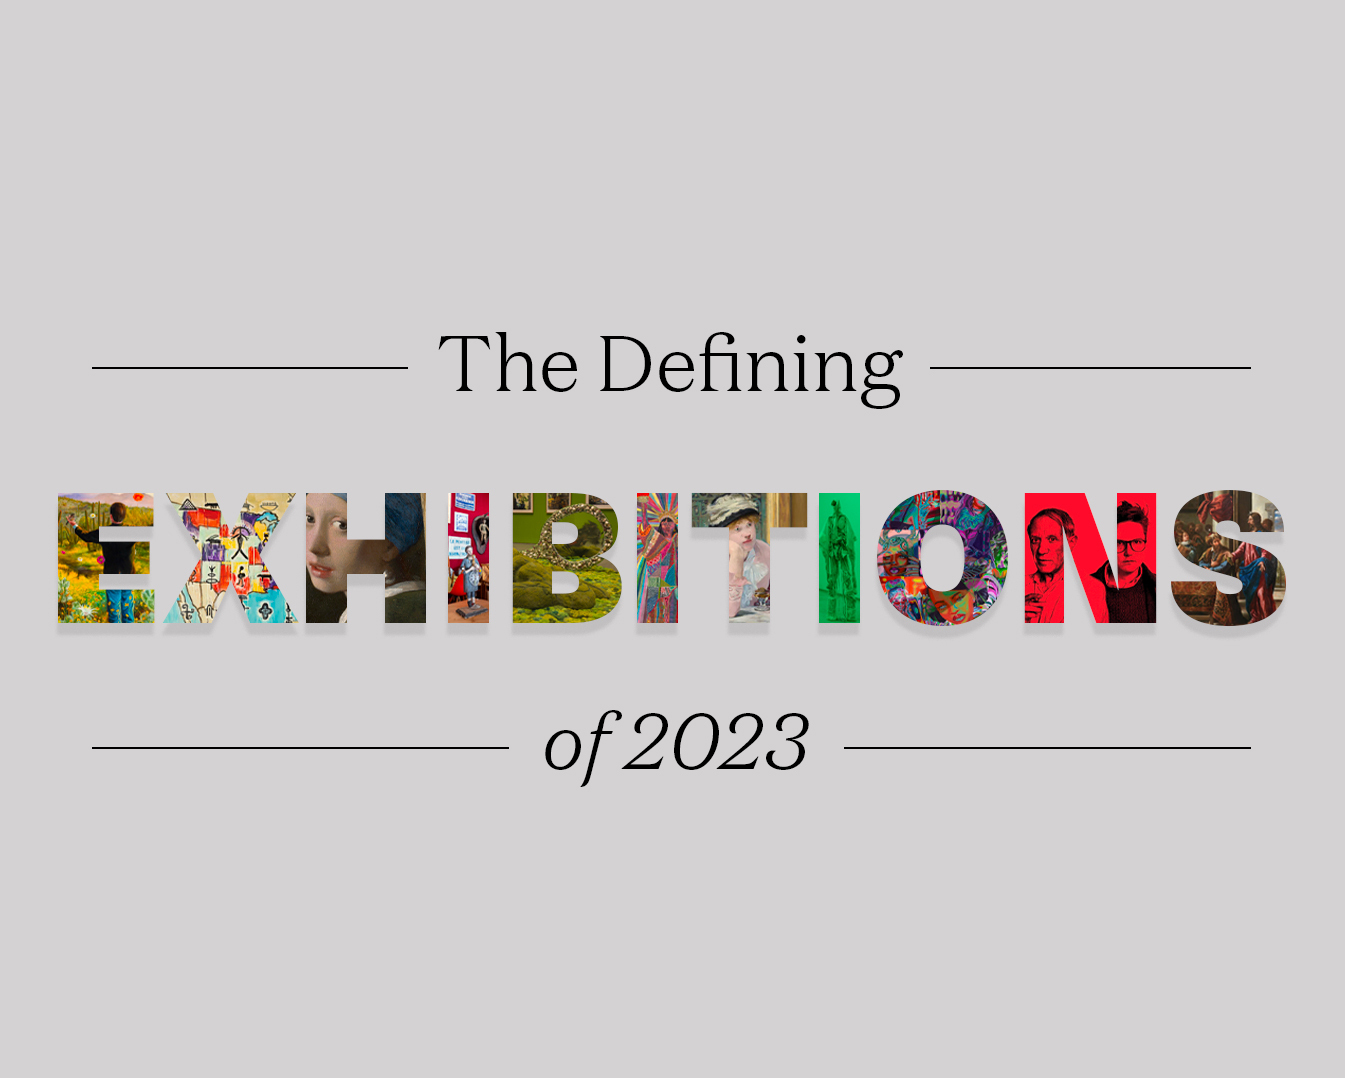 A text reading 'The Defining Exhibitions of 2023' with artworks filling the 'Exhibitions' part.